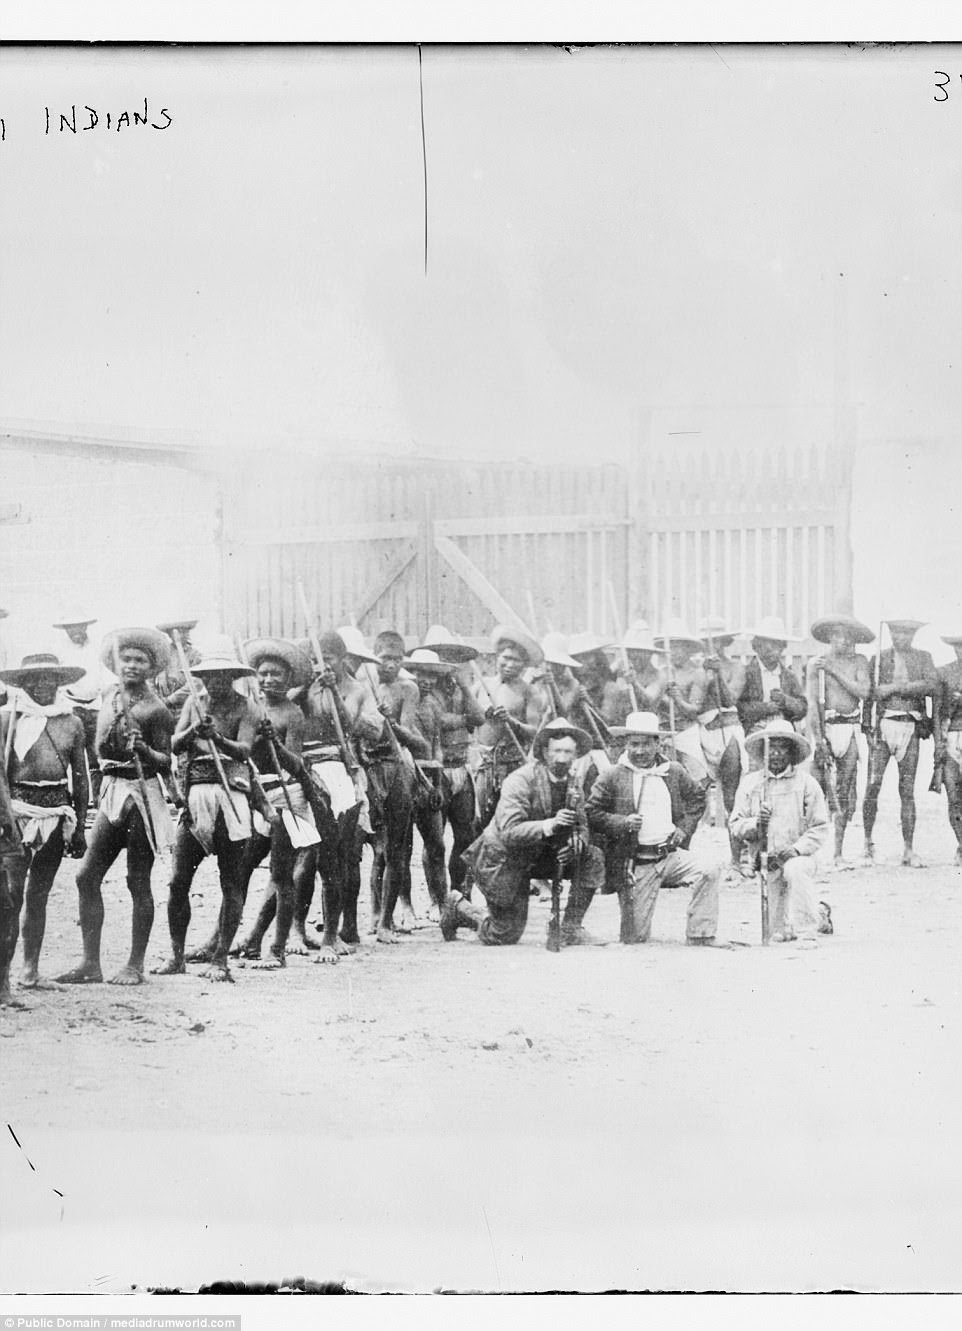 Yaqui Indians, some with bows and arrows and others with guns, pictured in 1911. The last recorded conflict between Native Americans and the U.S army involved the Yaqui 